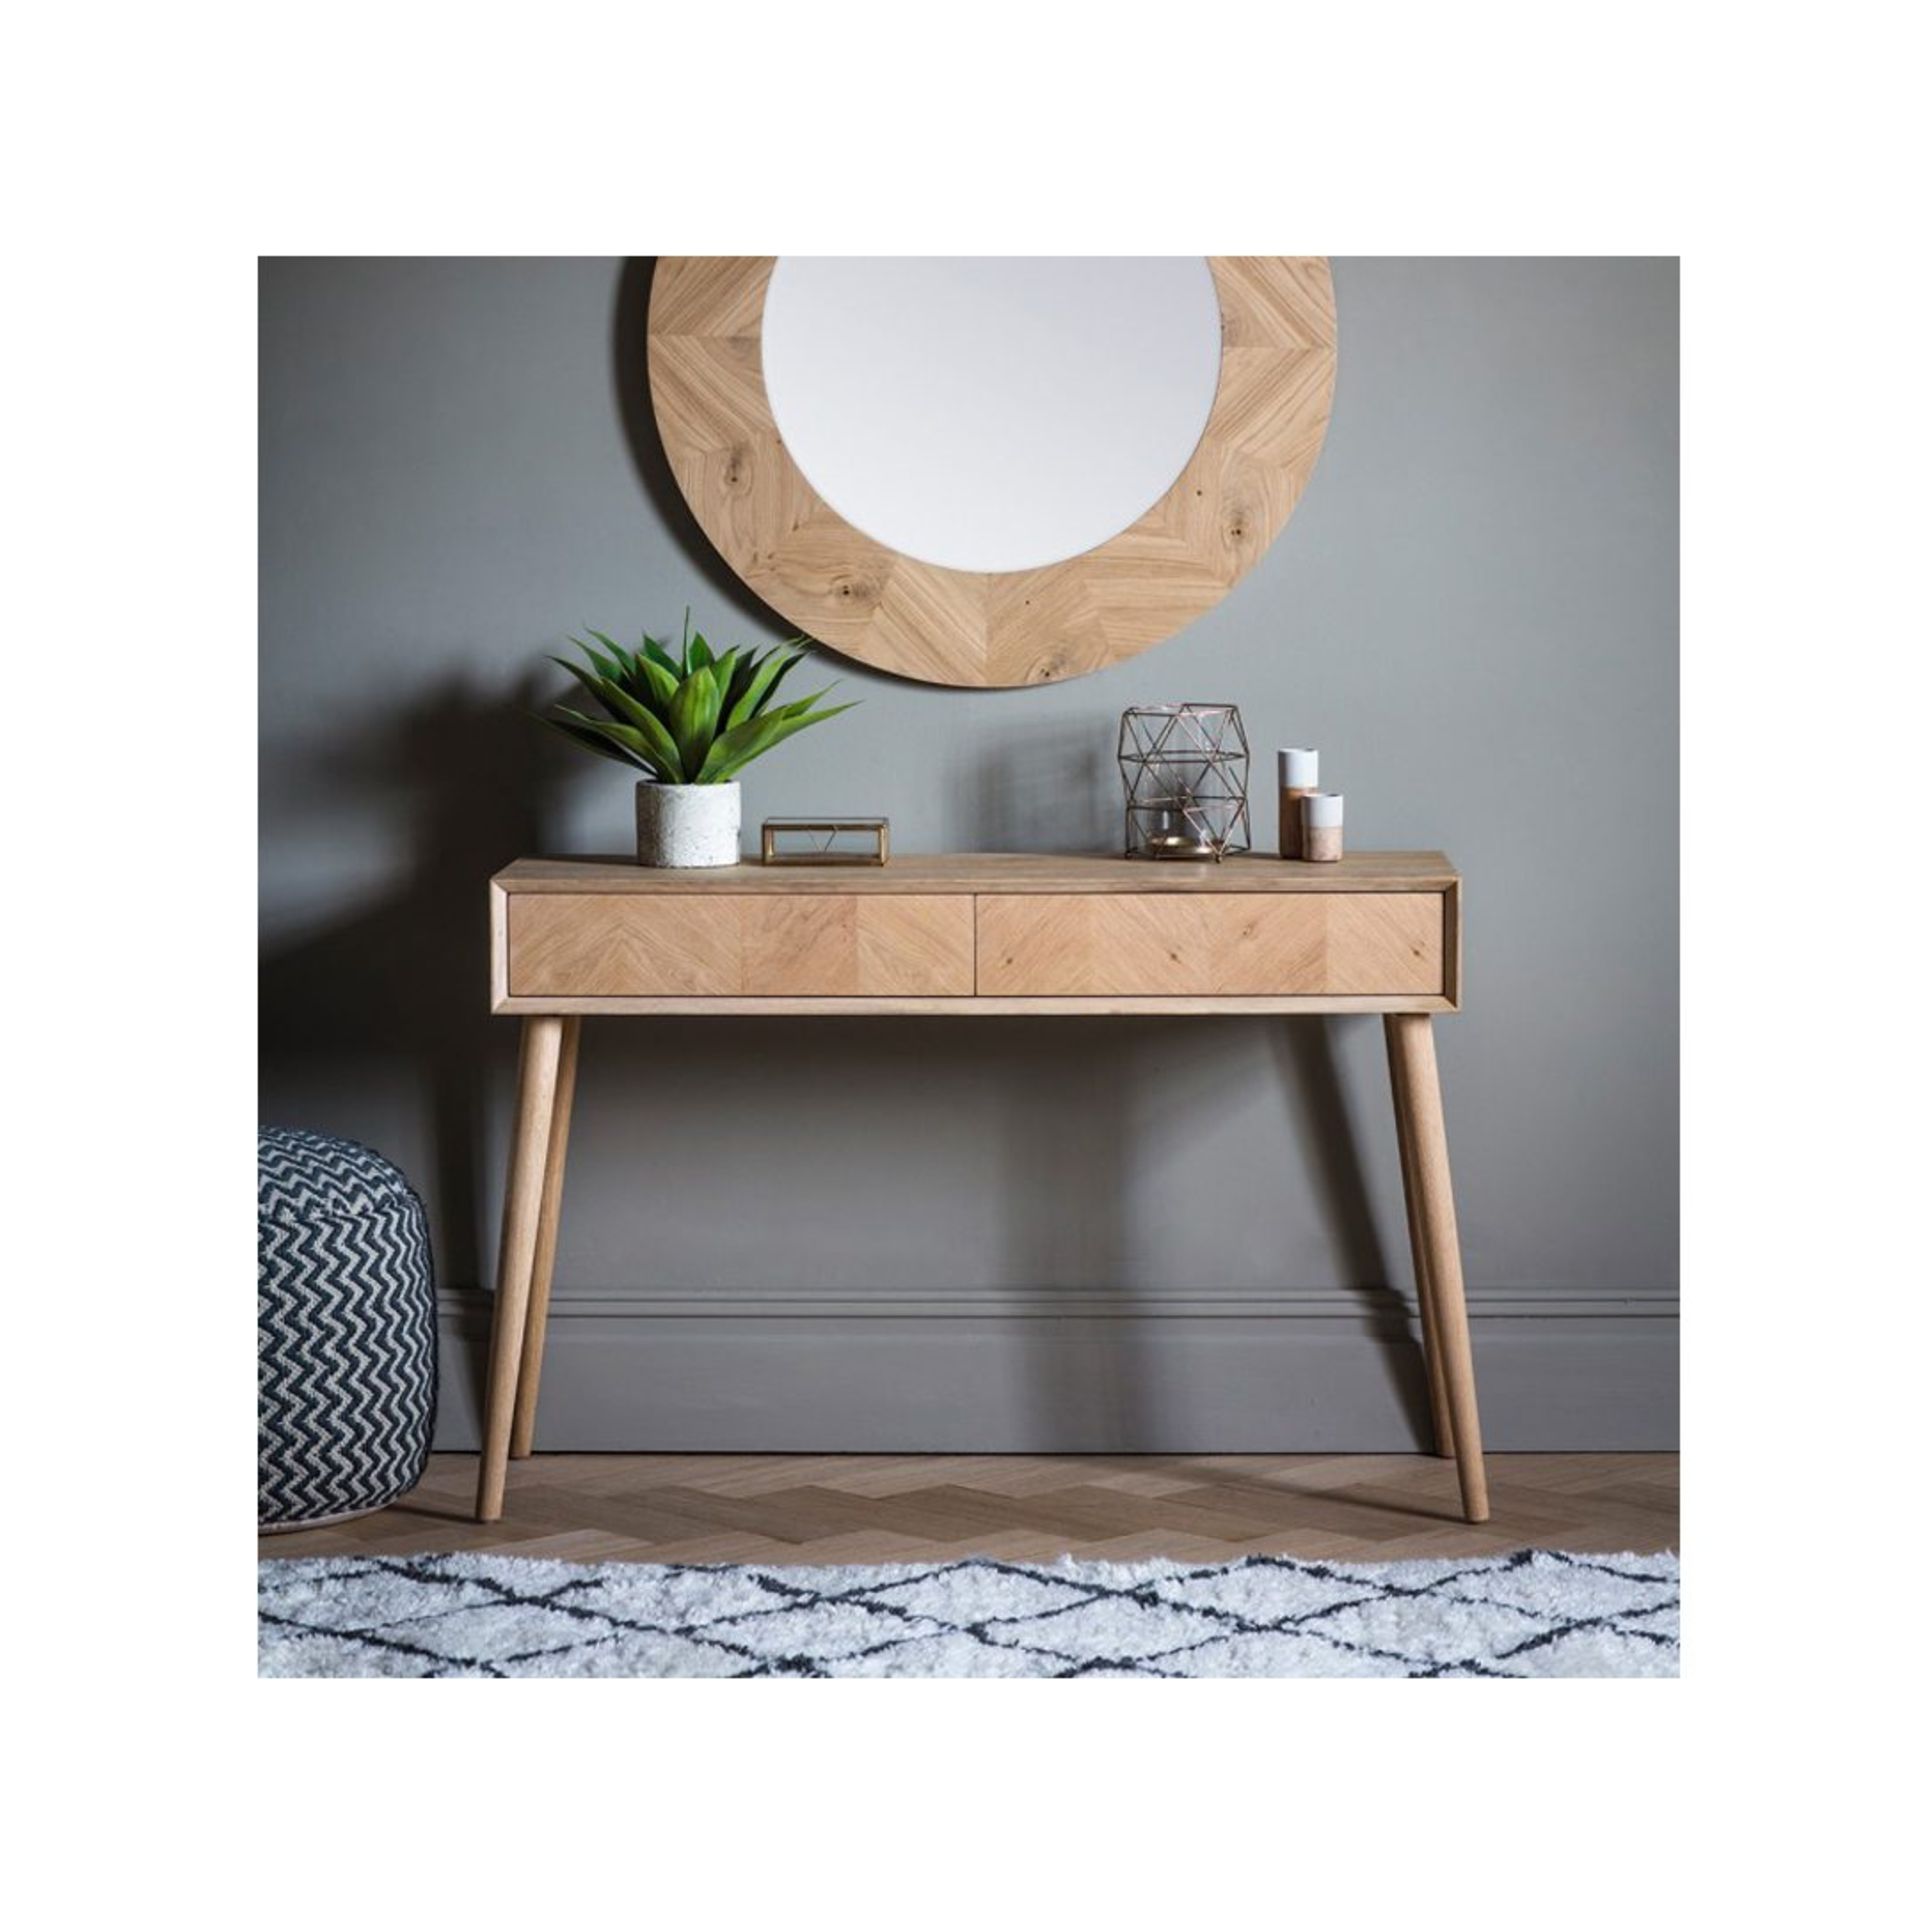 Milano 2 Drawer Console Table The stunning Milano 2 Drawer Console Table features a beautiful - Image 2 of 2